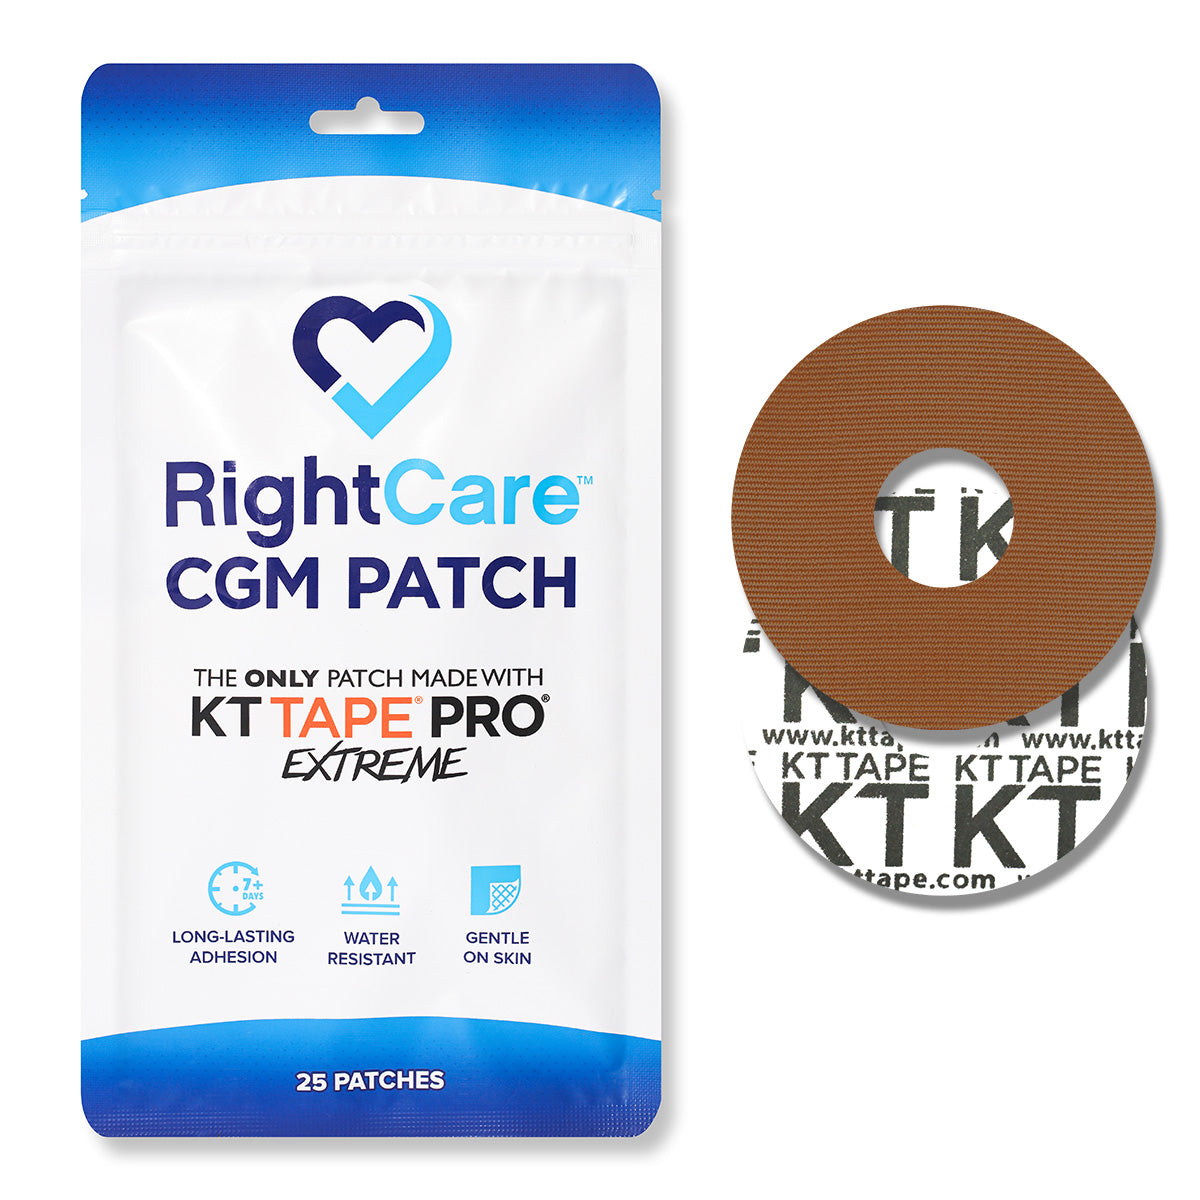 RightCare CGM Adhesive Patch made with KT Tape, Libre, Bag of 25 35095720